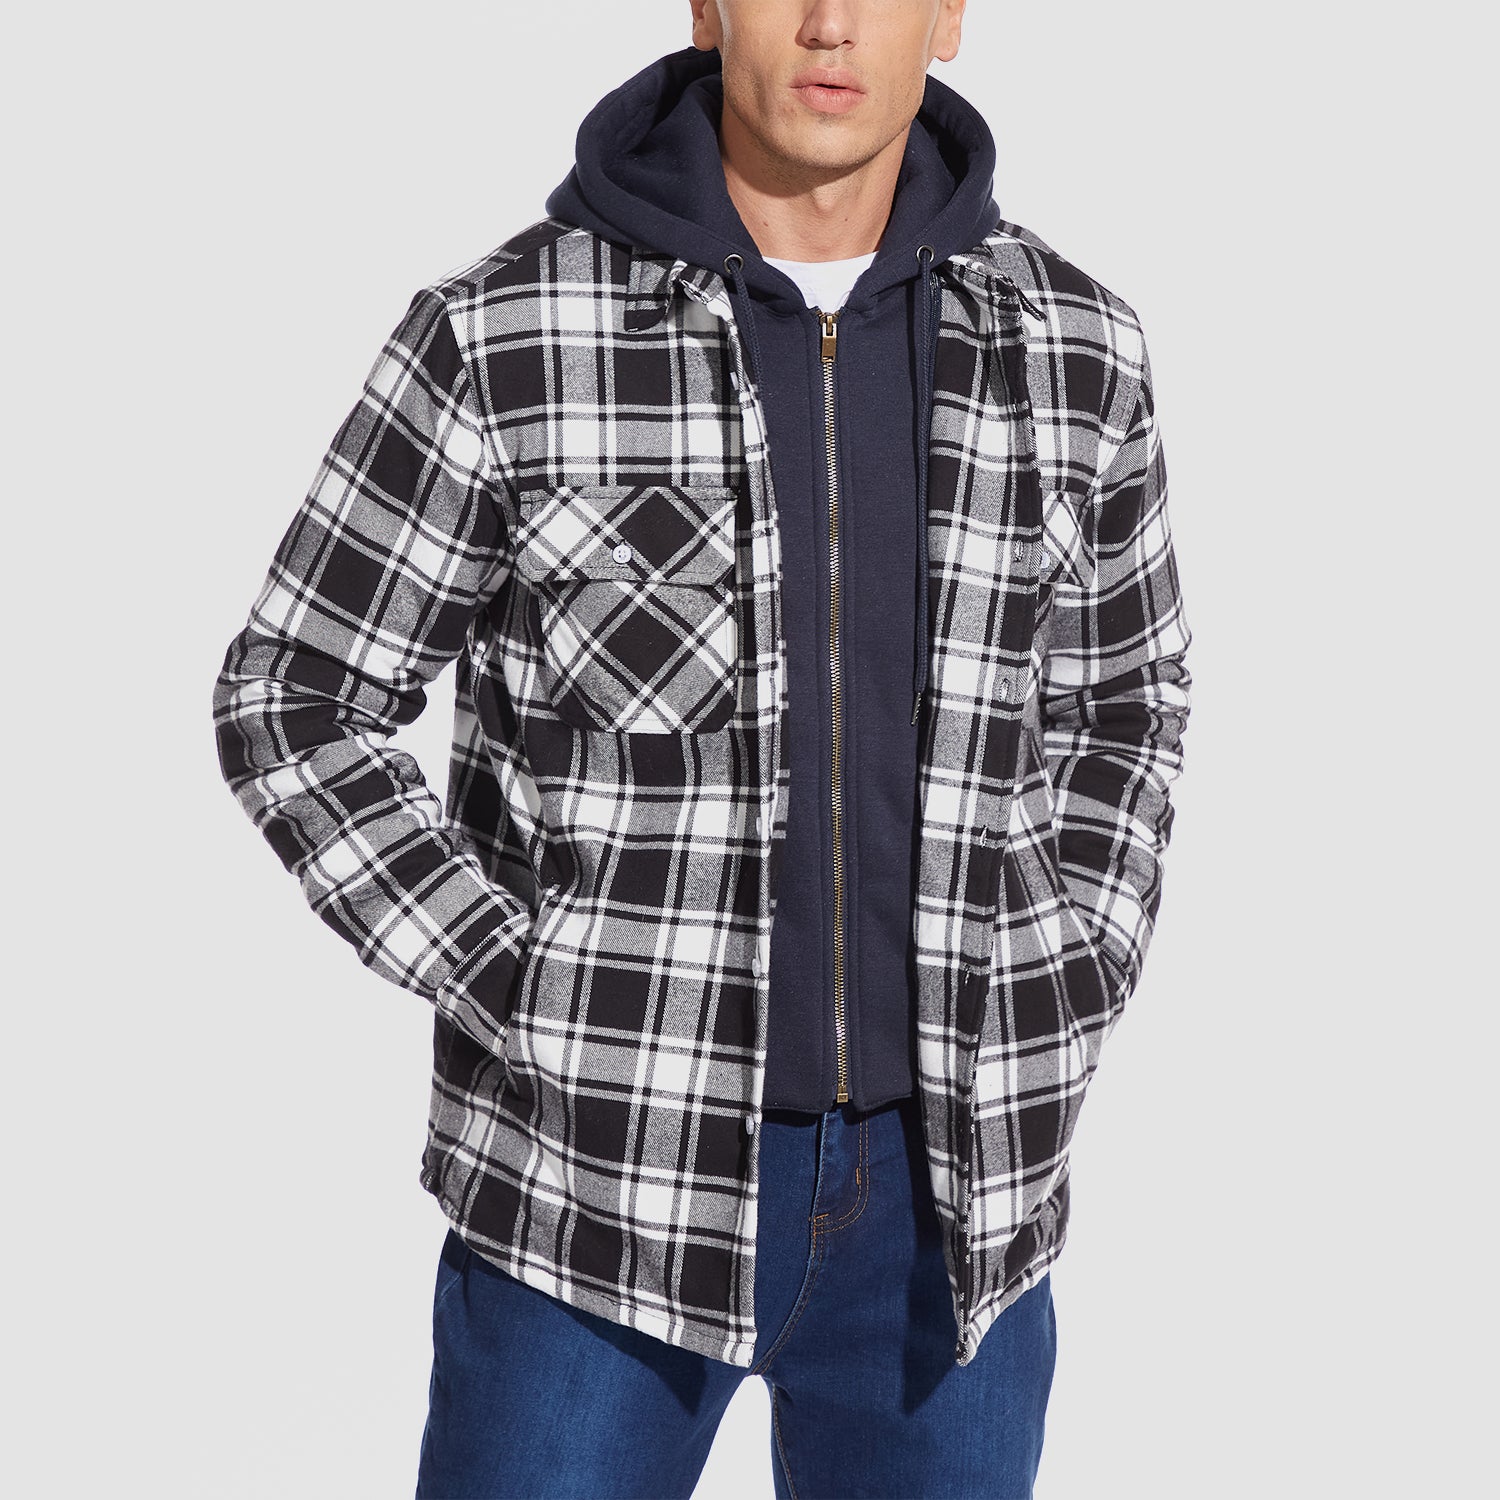 Brnmxoke Men's Lined Hooded Flannel Shirt Jacket with Pockets Plus Size  Quilted Plaid Coat Button Down Plaid Button Up Winter Thermal Warm Jackets  